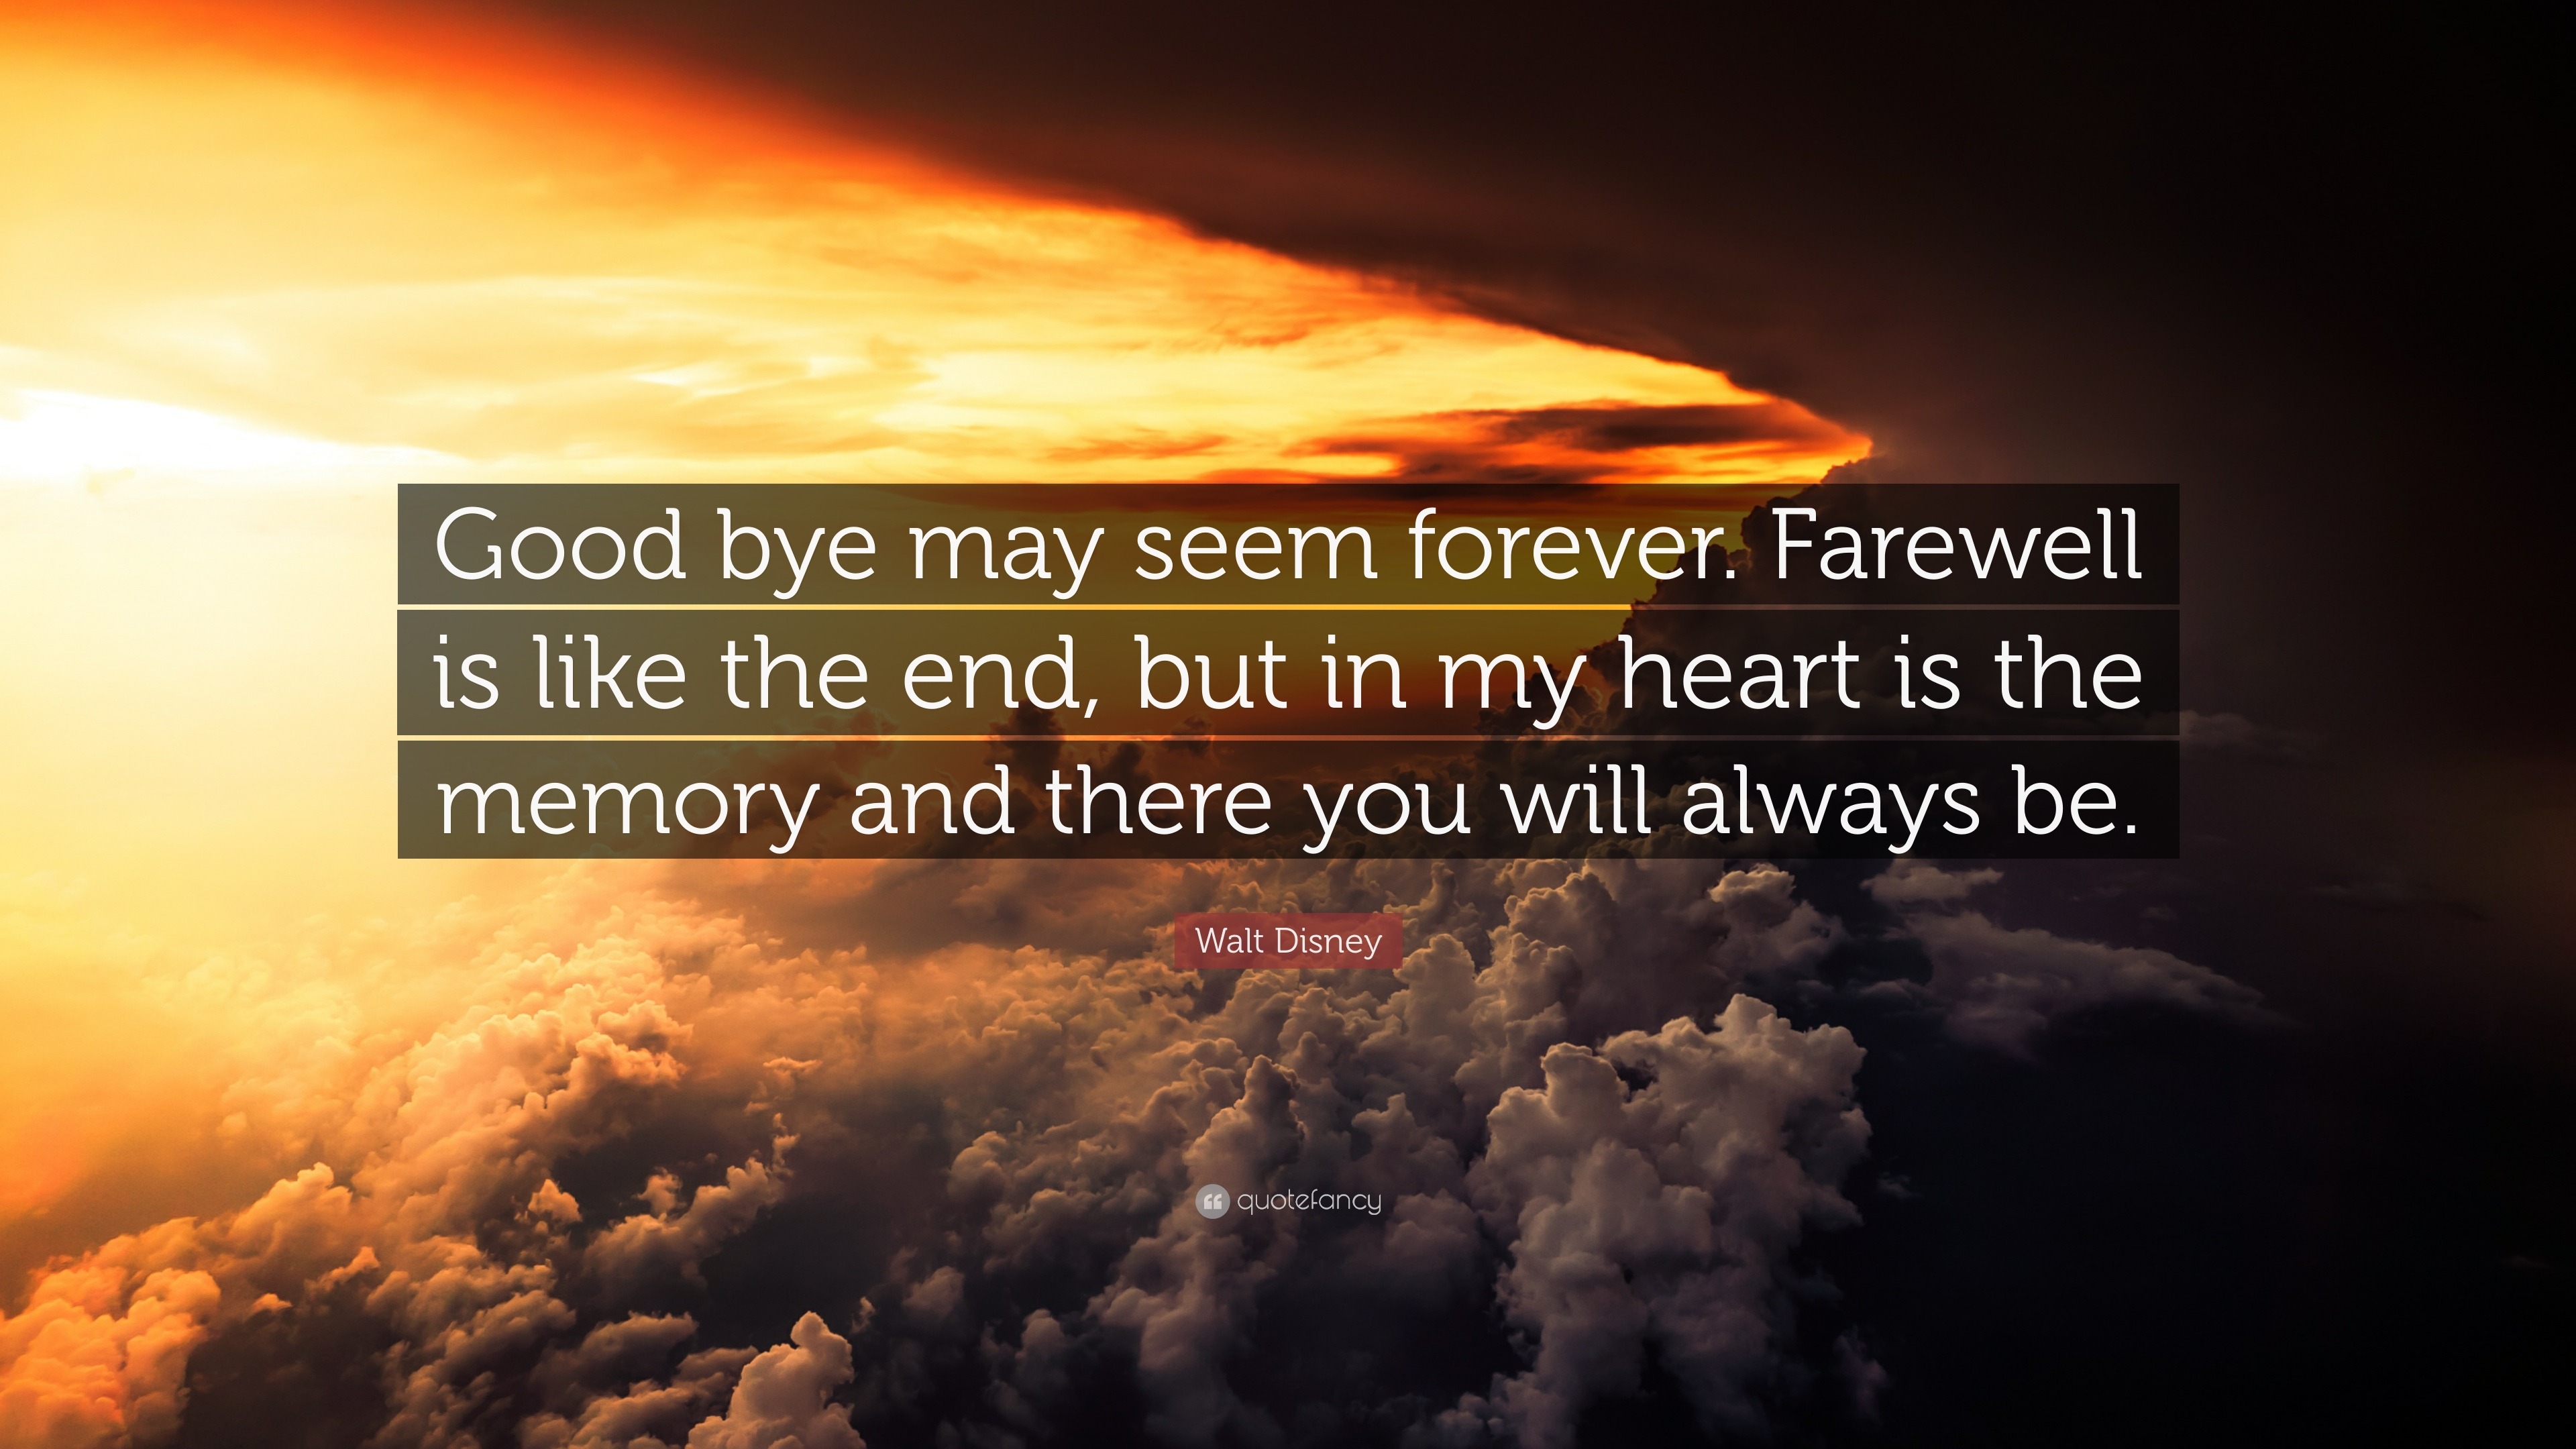 Walt Disney Quote: “Good bye may seem forever. Farewell is like the end ...